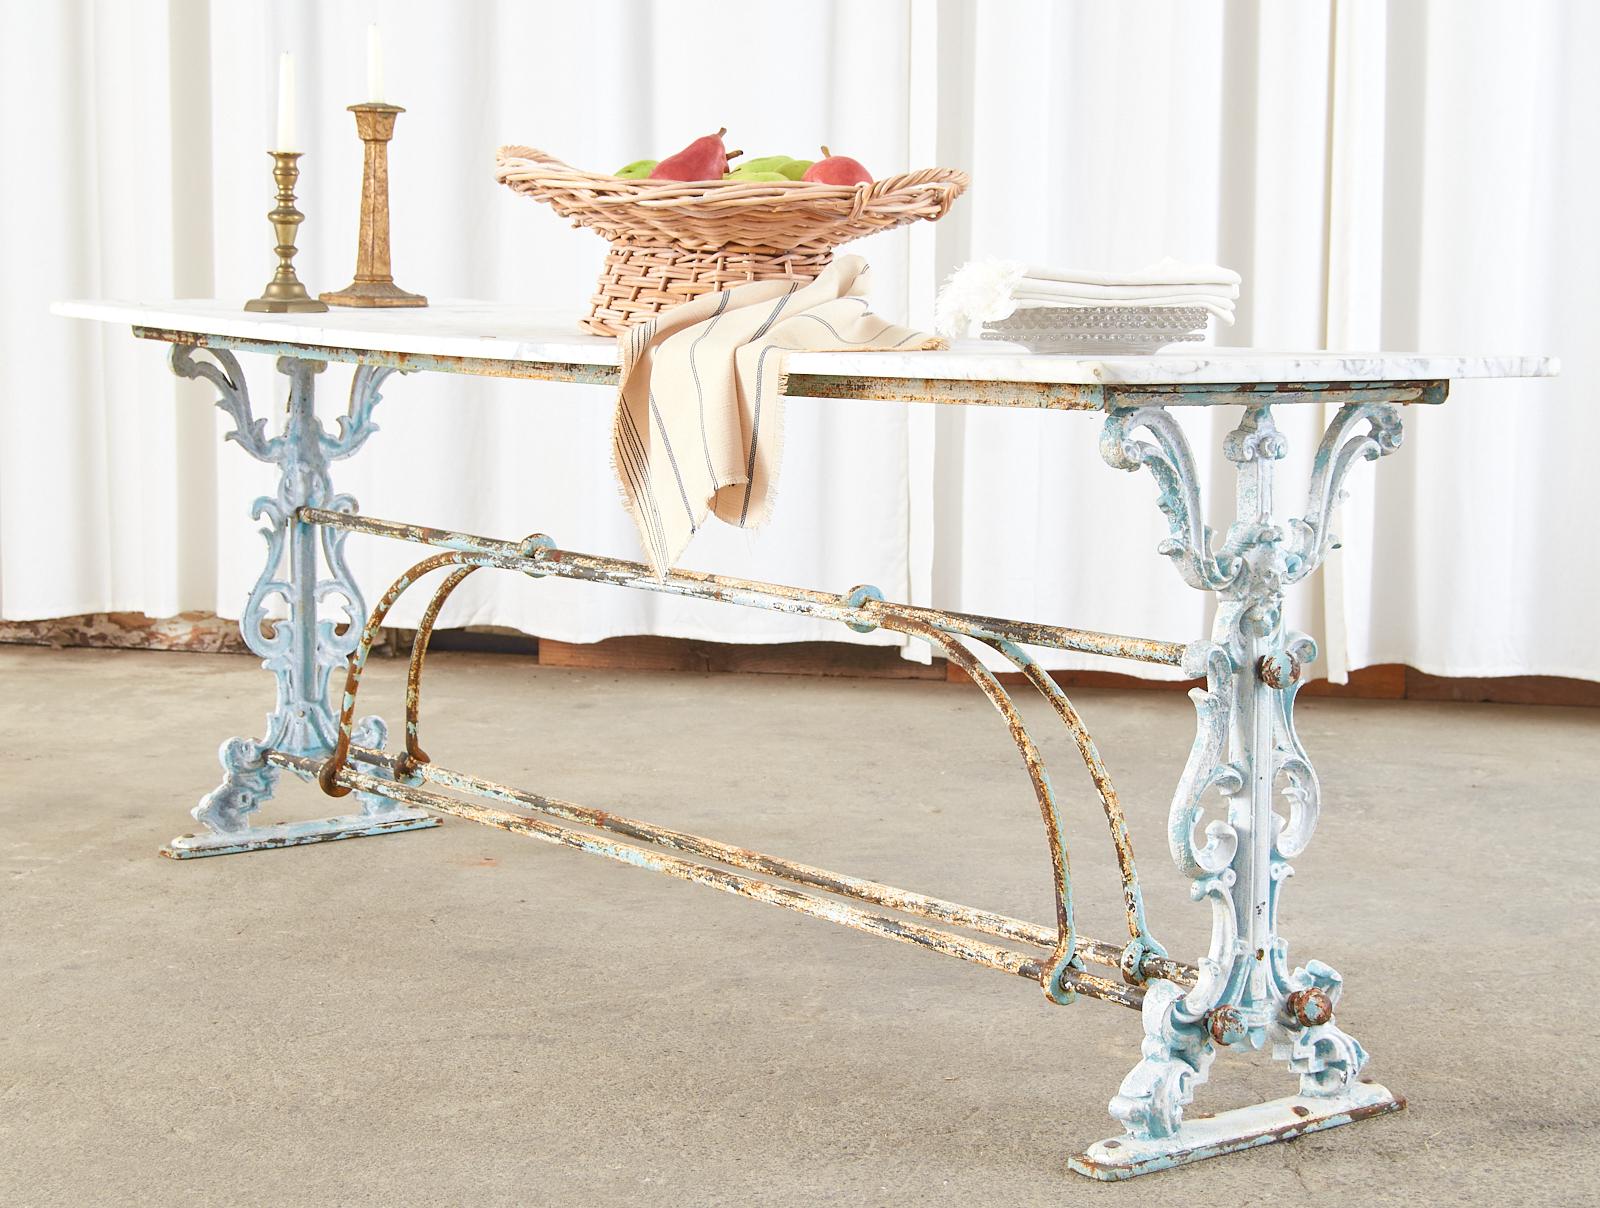 Fantastic French Art Nouveau patisserie or pastry table featuring a weathered, smooth Carrara marble top. The late 19th century/early 20th century table is hand-crafted with a trestle style base. The decorative legs have acanthus scroll detail